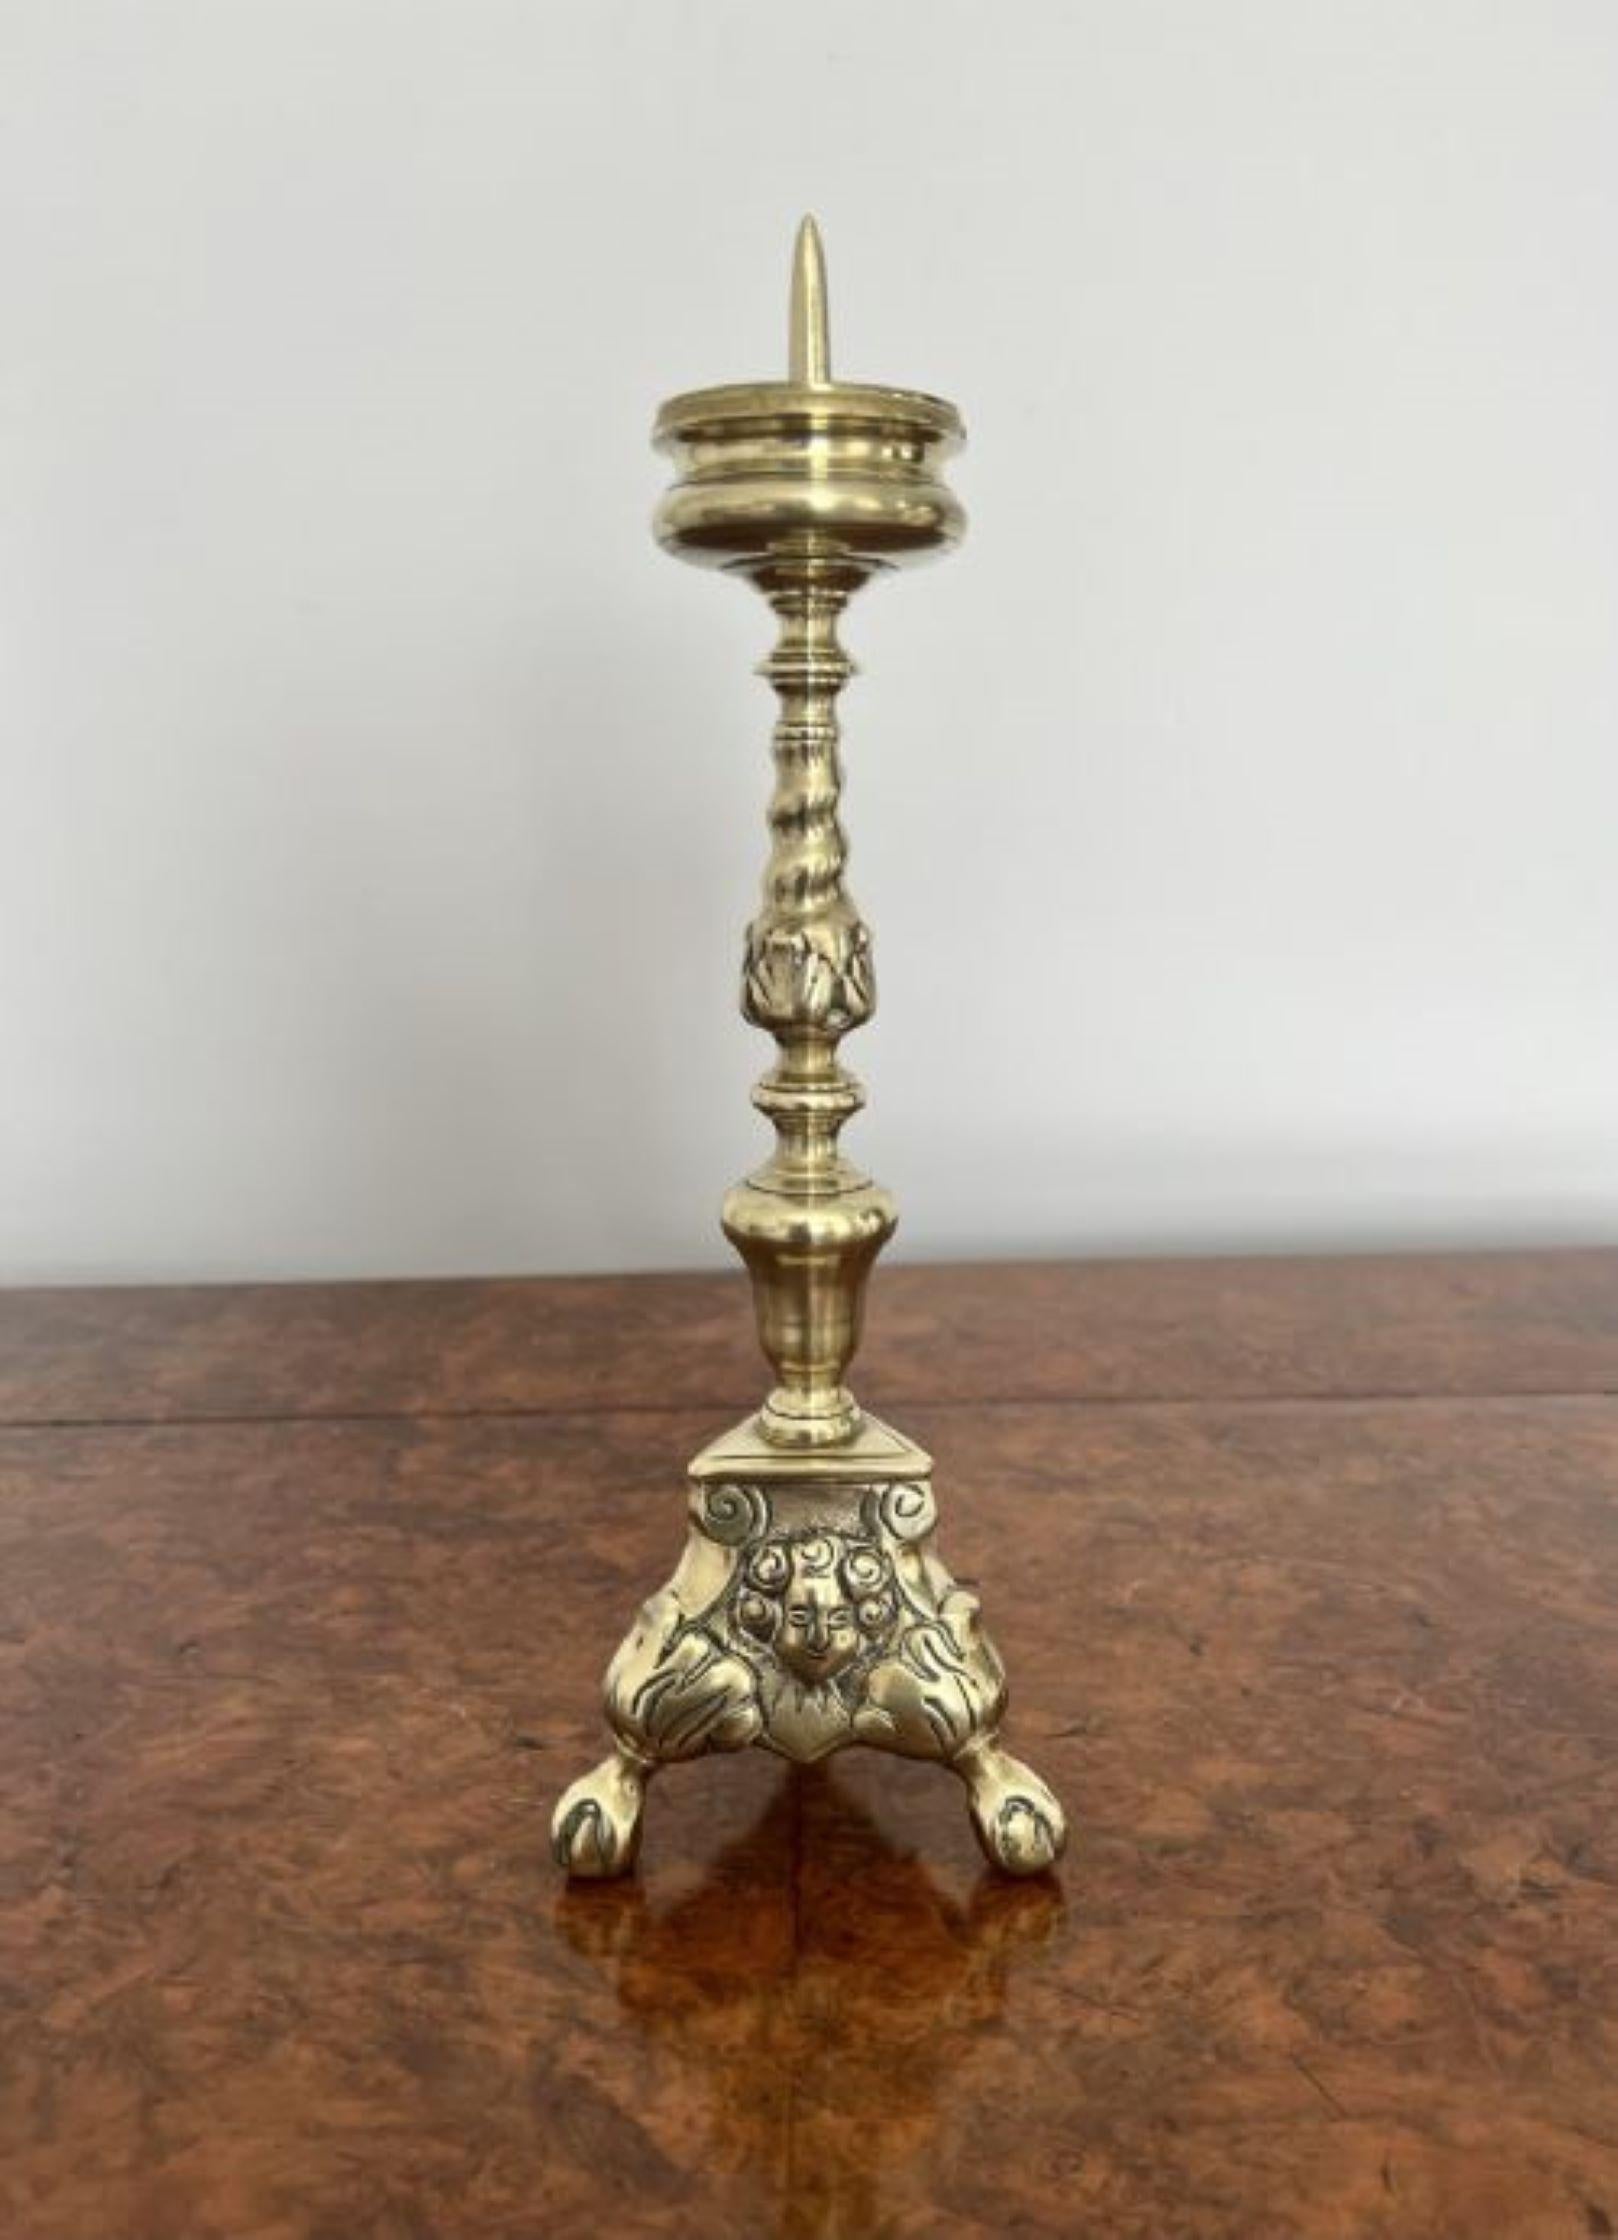 Quality Pair of Unusual Antique Victorian Ornate Brass Pricket Candlestick For Sale 3